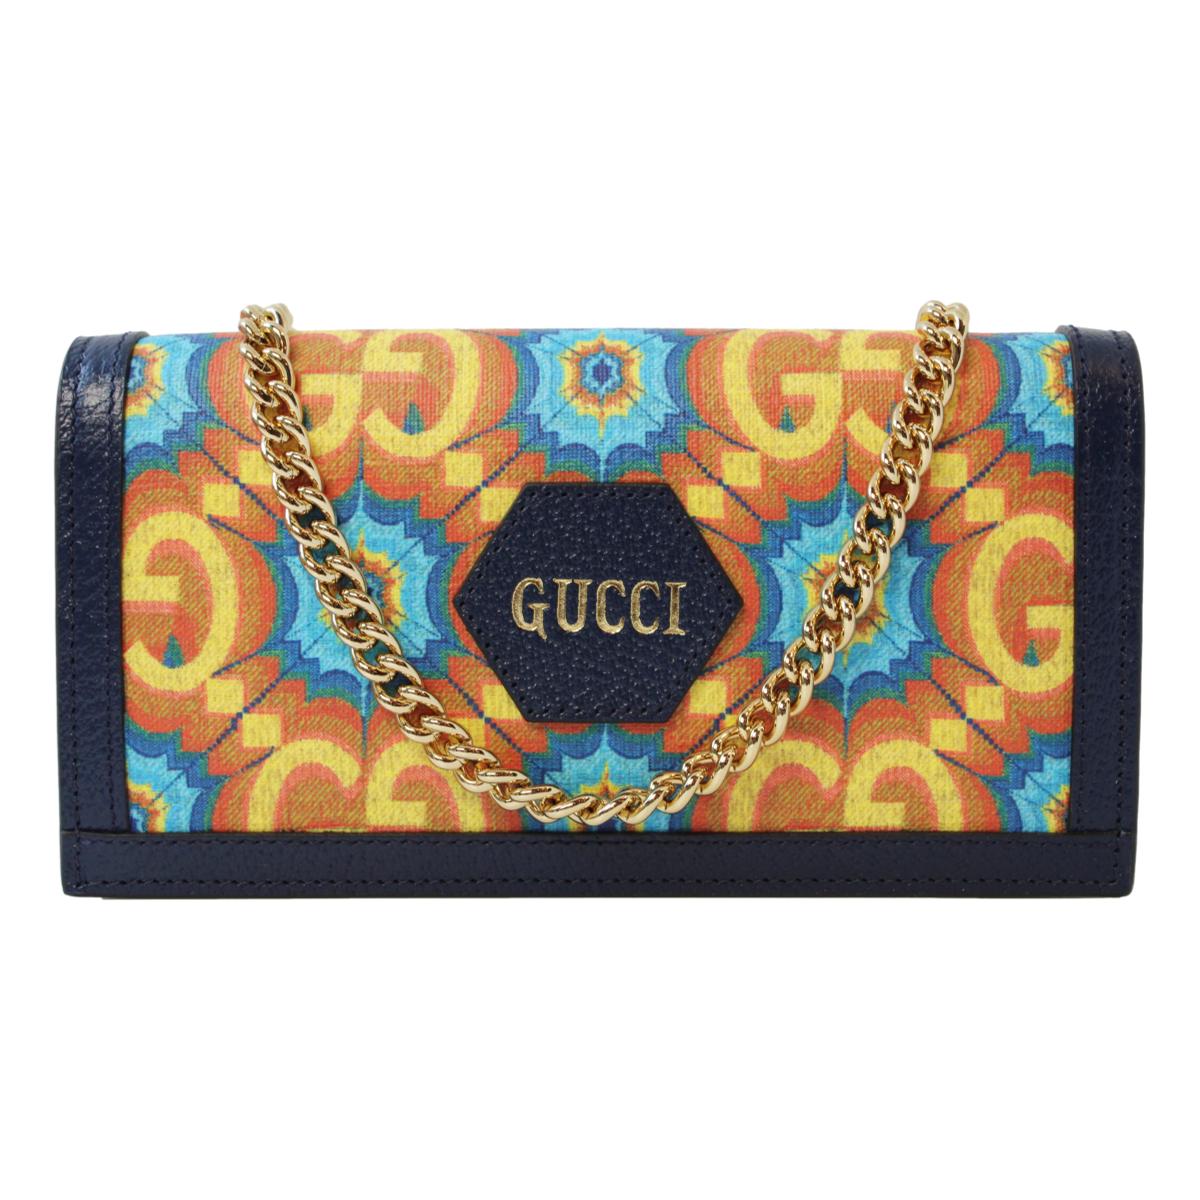 Gucci Centennial GG Kaleidoscope Wallet On Chain Navy Leather 676294 at_Queen_Bee_of_Beverly_Hills